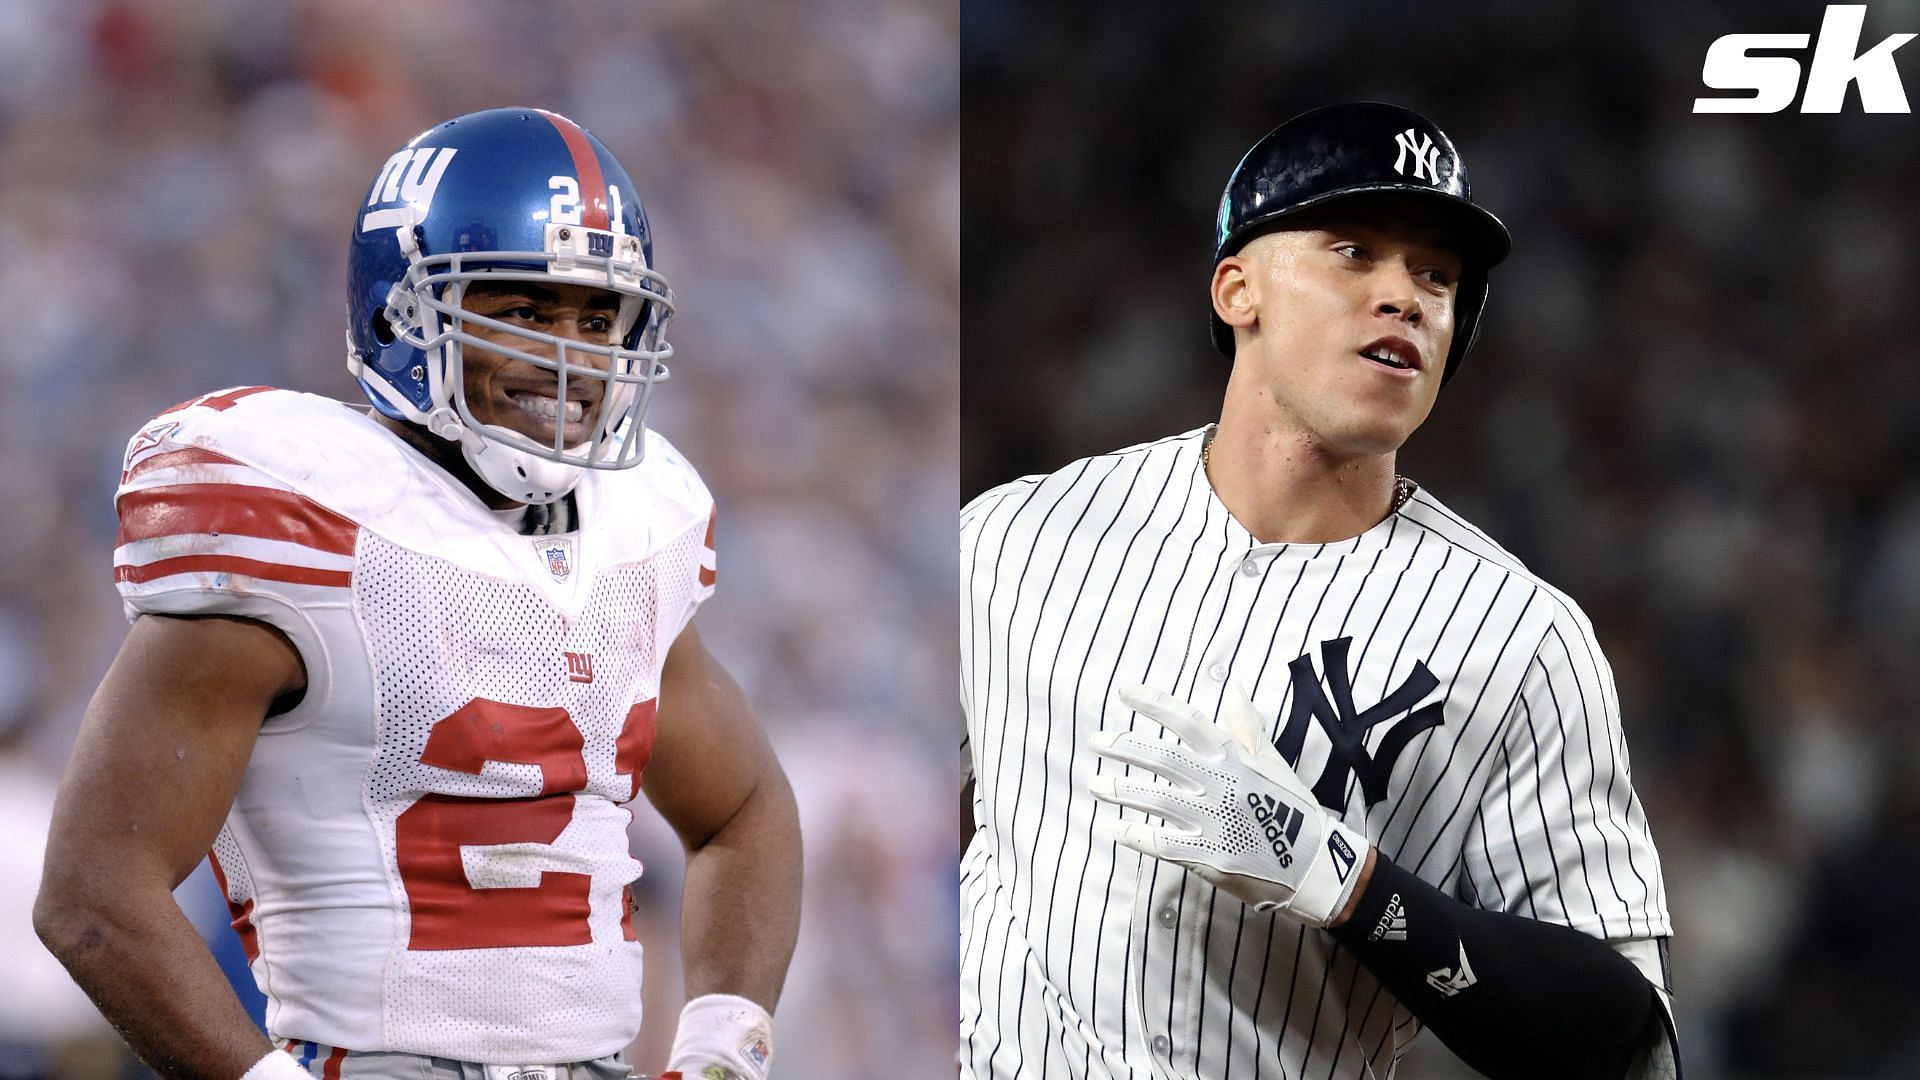 Former NFL running back Tiki Barber has cast further doubt on the Aaron Judge situation